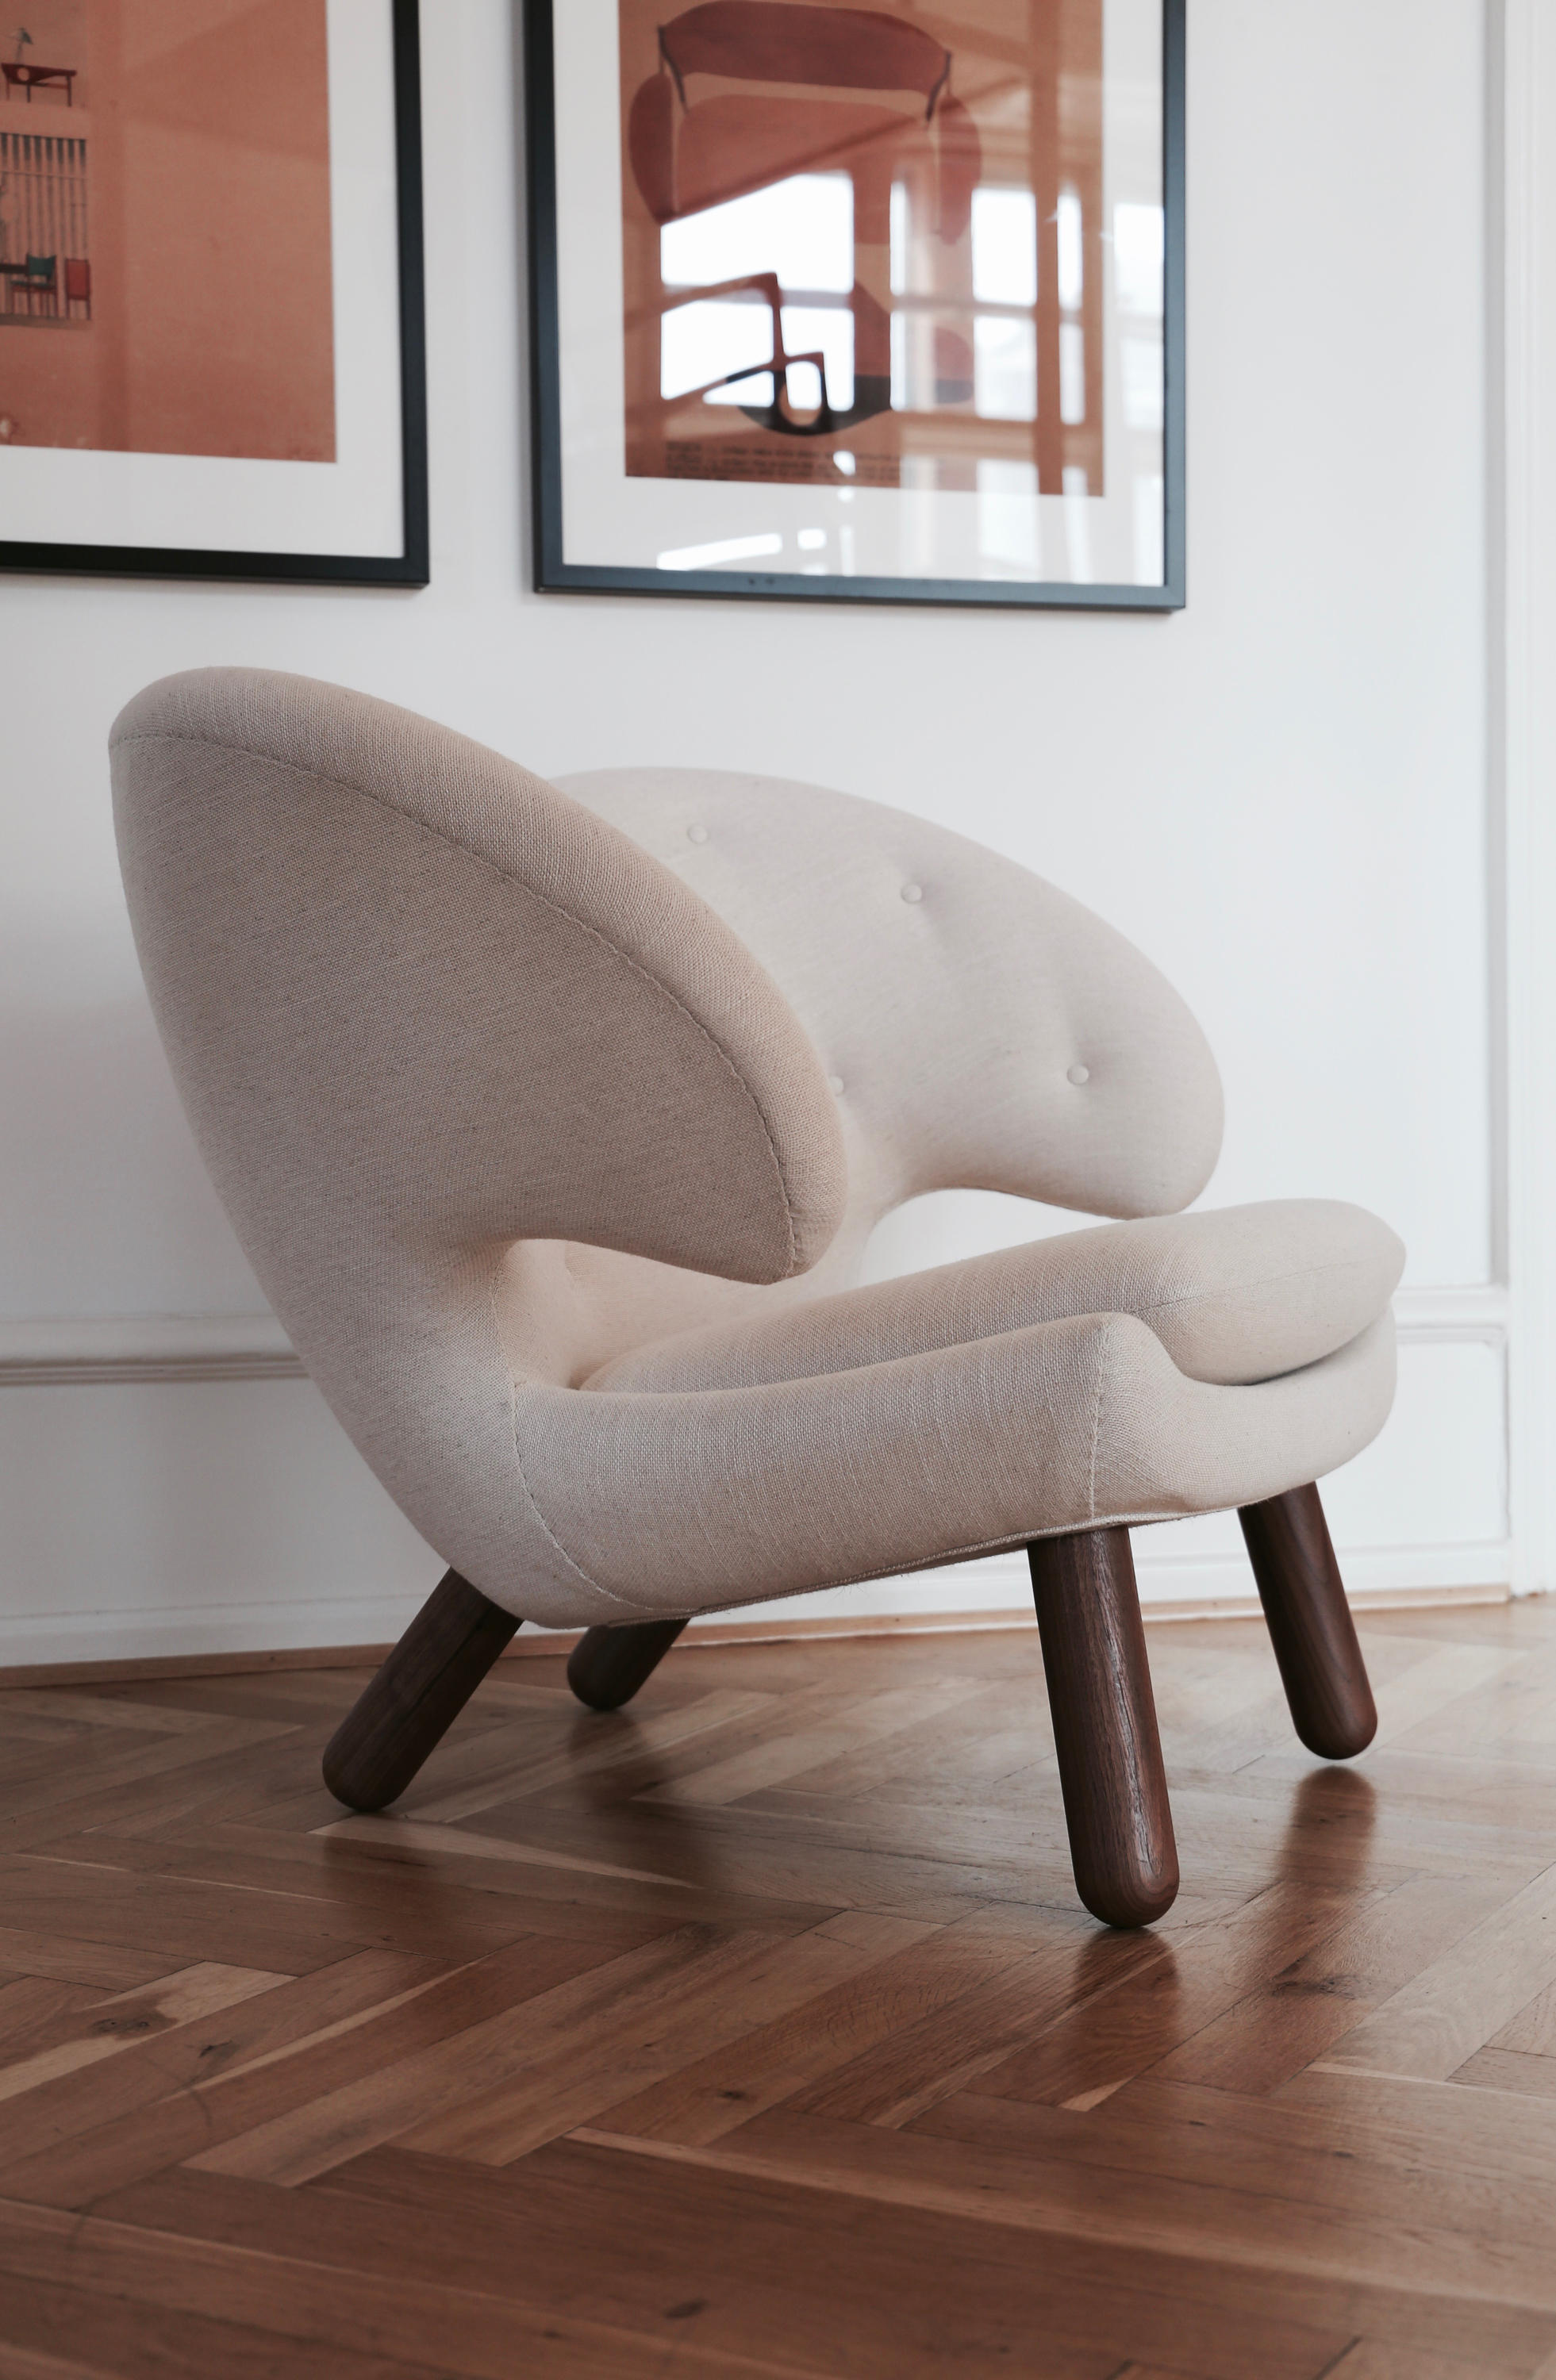 PELICAN CHAIR - Armchairs from House of Finn Juhl - Onecollection